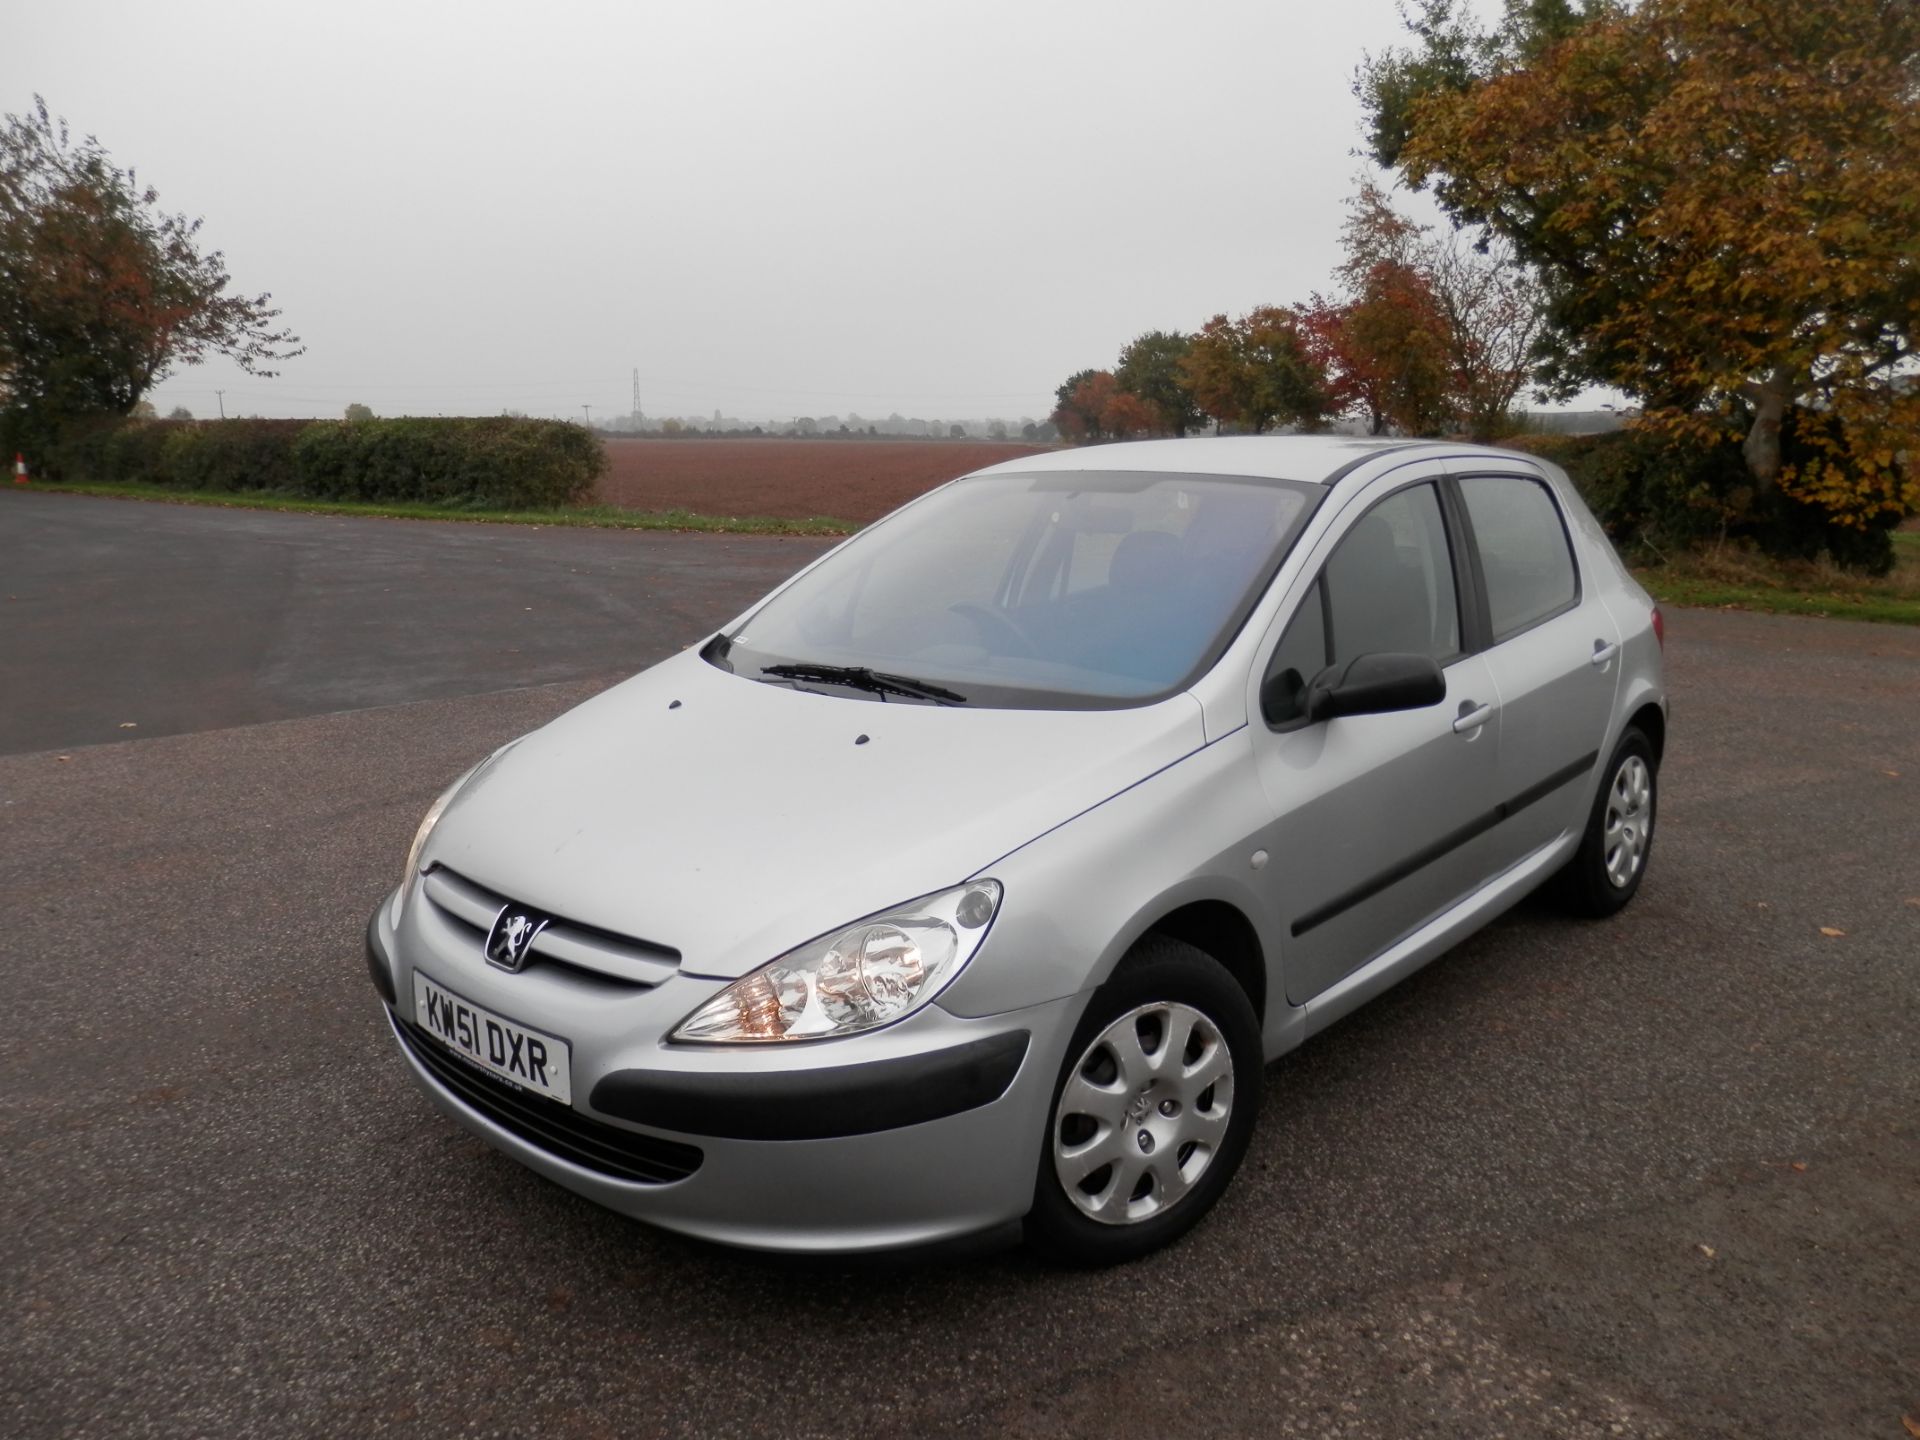 2002/51 PLATE PEUGEOT 307 1.6 LX AUTOMATIC, ONLY 51K WARRANTED MILES & MOT MAY 2017, GREAT CAR. - Image 8 of 22